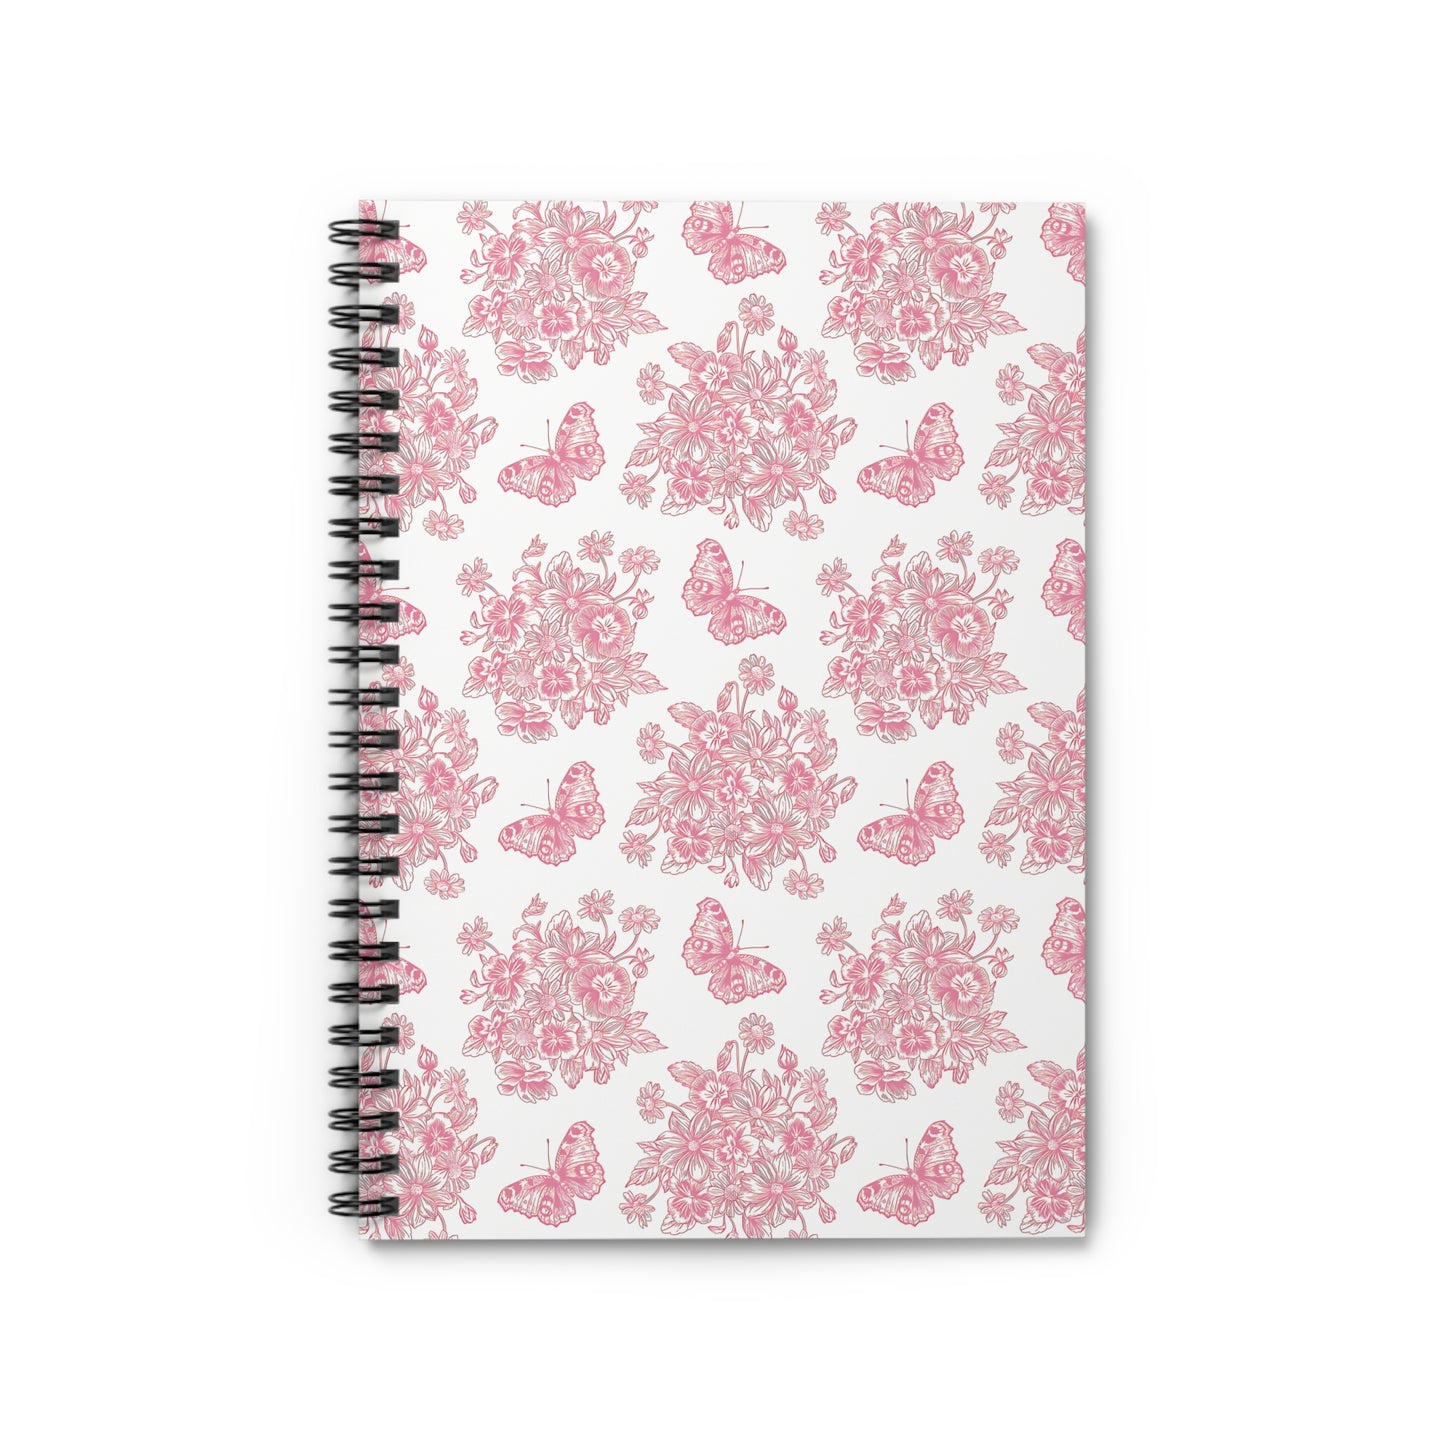 Pink & White Butterfly Spiral Notebook - Ruled Line